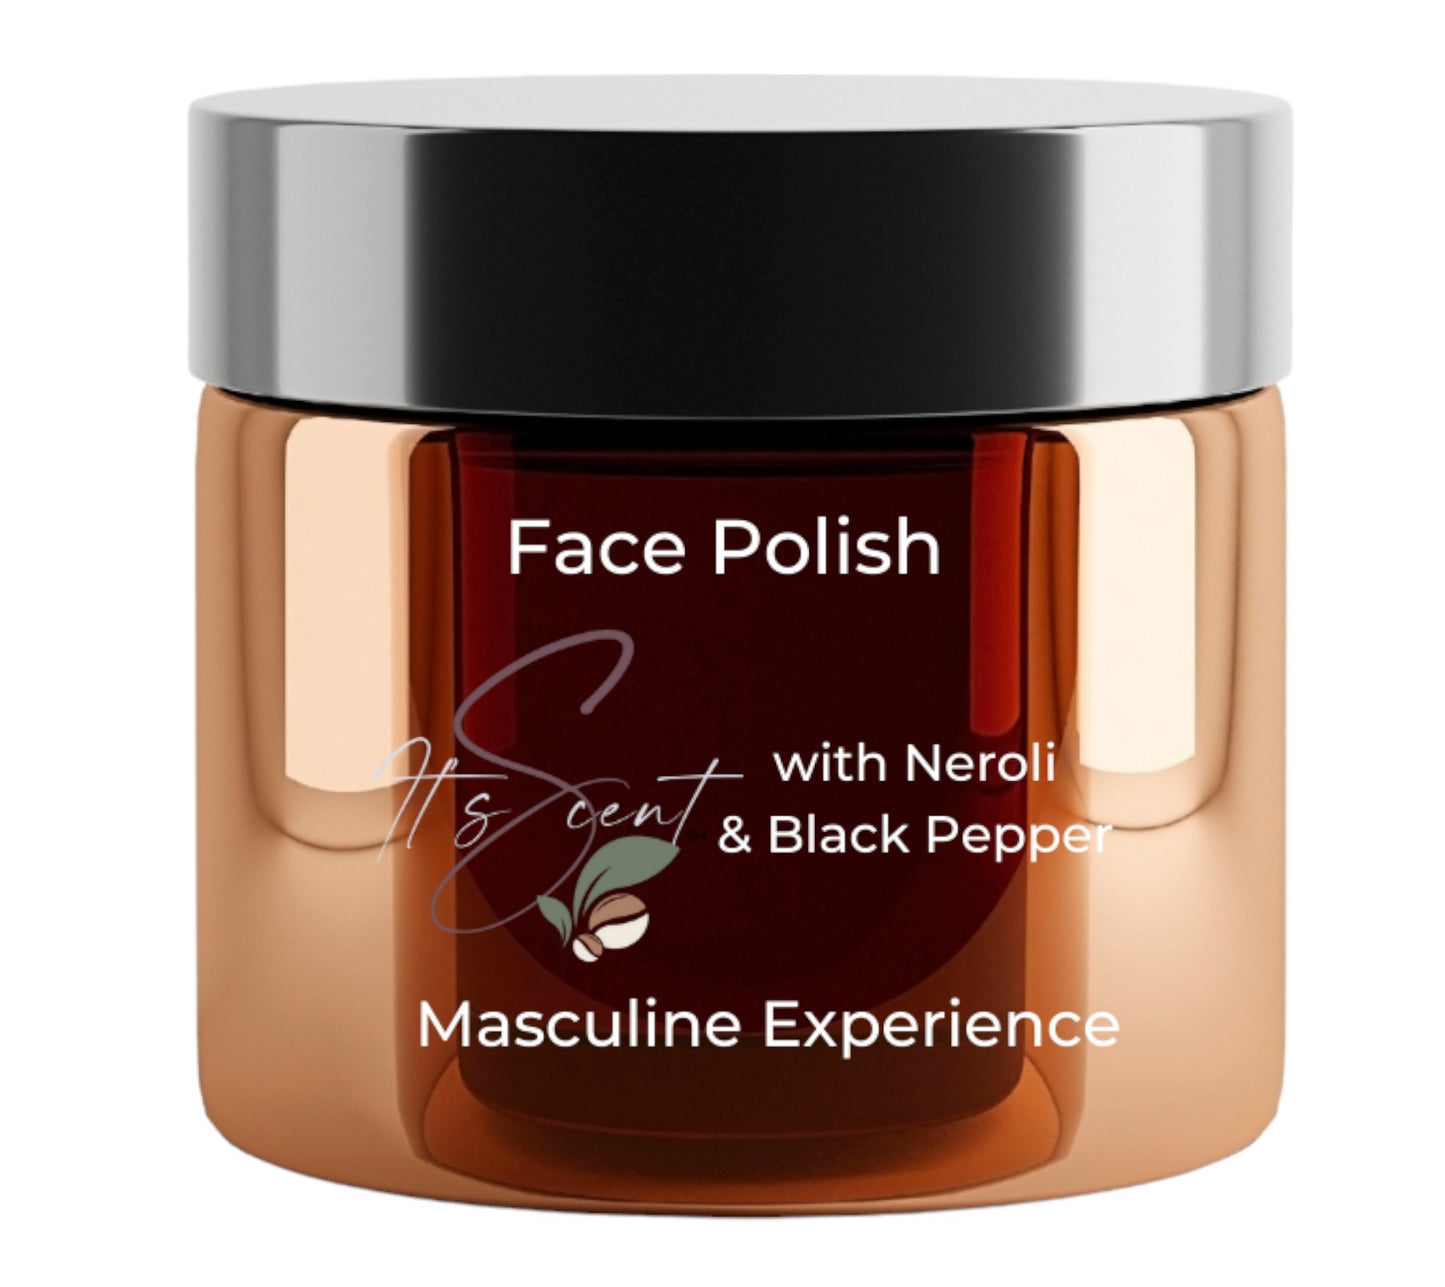 Masculine Experience Face Polish with Neroli & Black Pepper